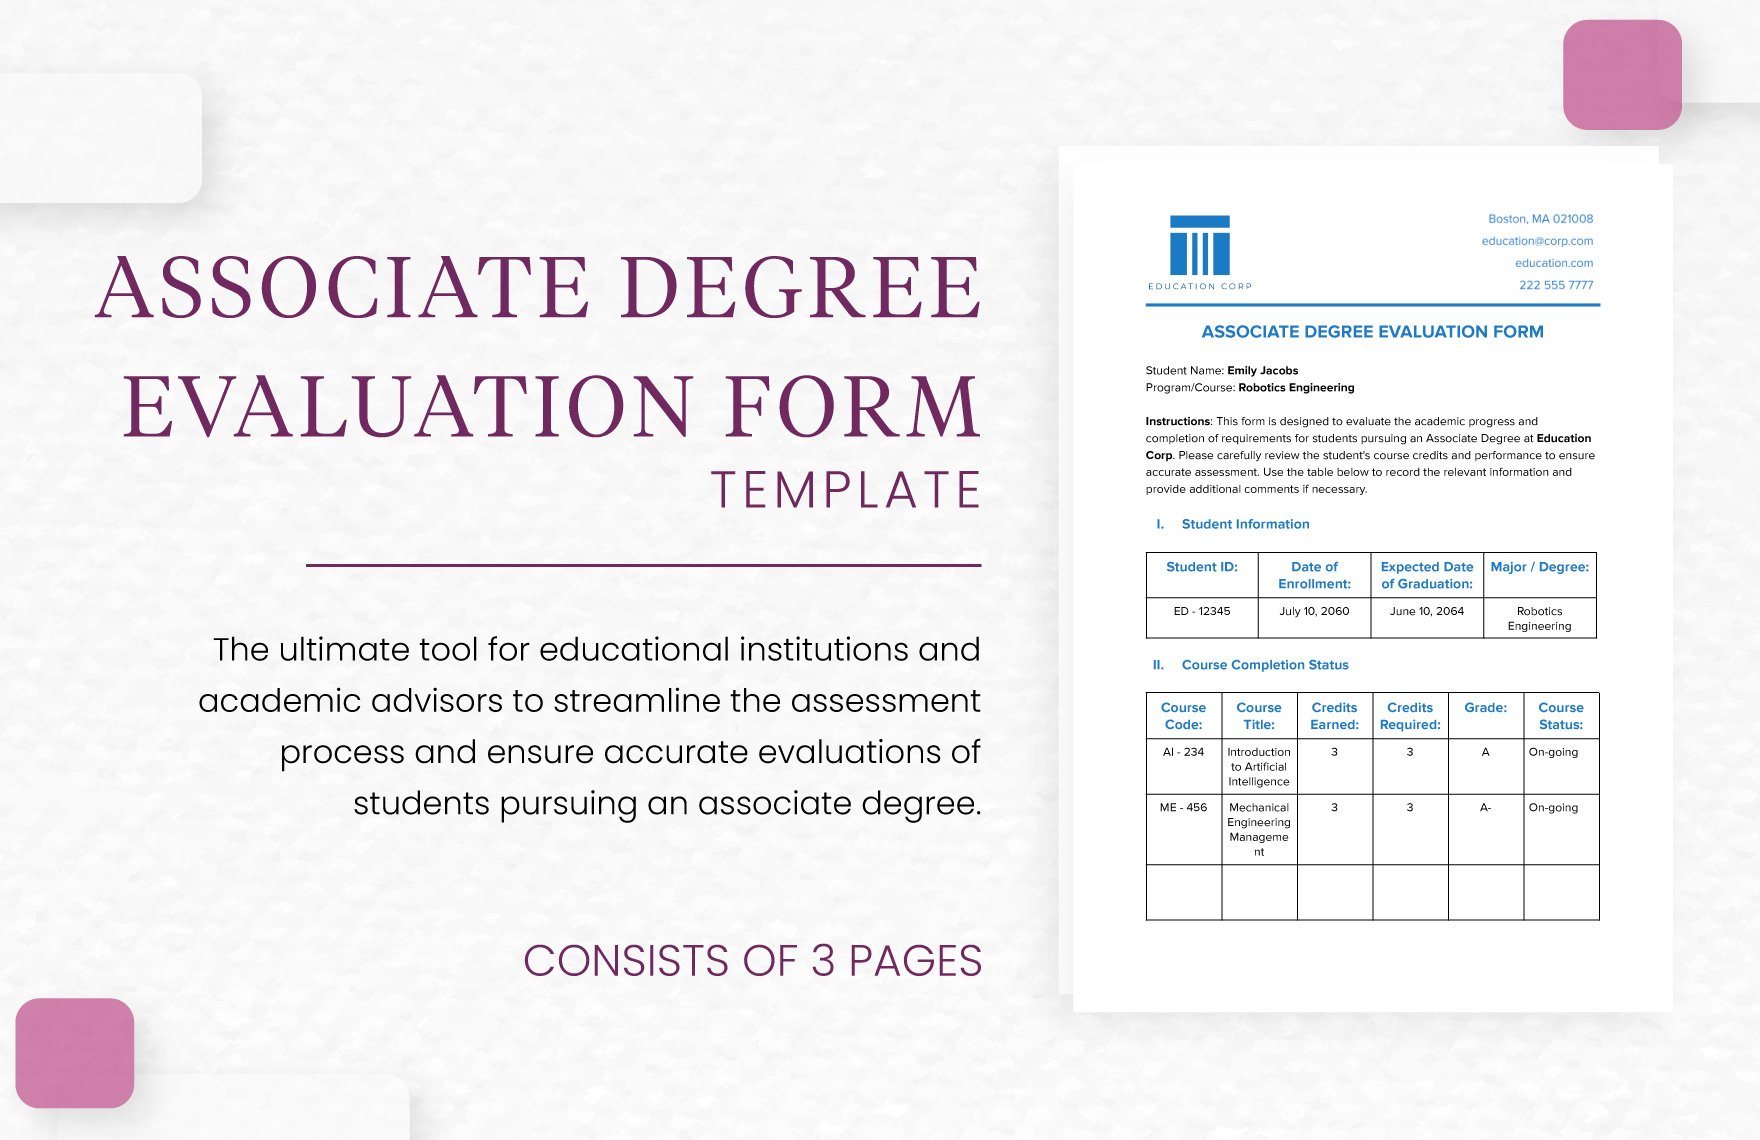 Associate Degree Evaluation Form Template in Word, Google Docs, PDF